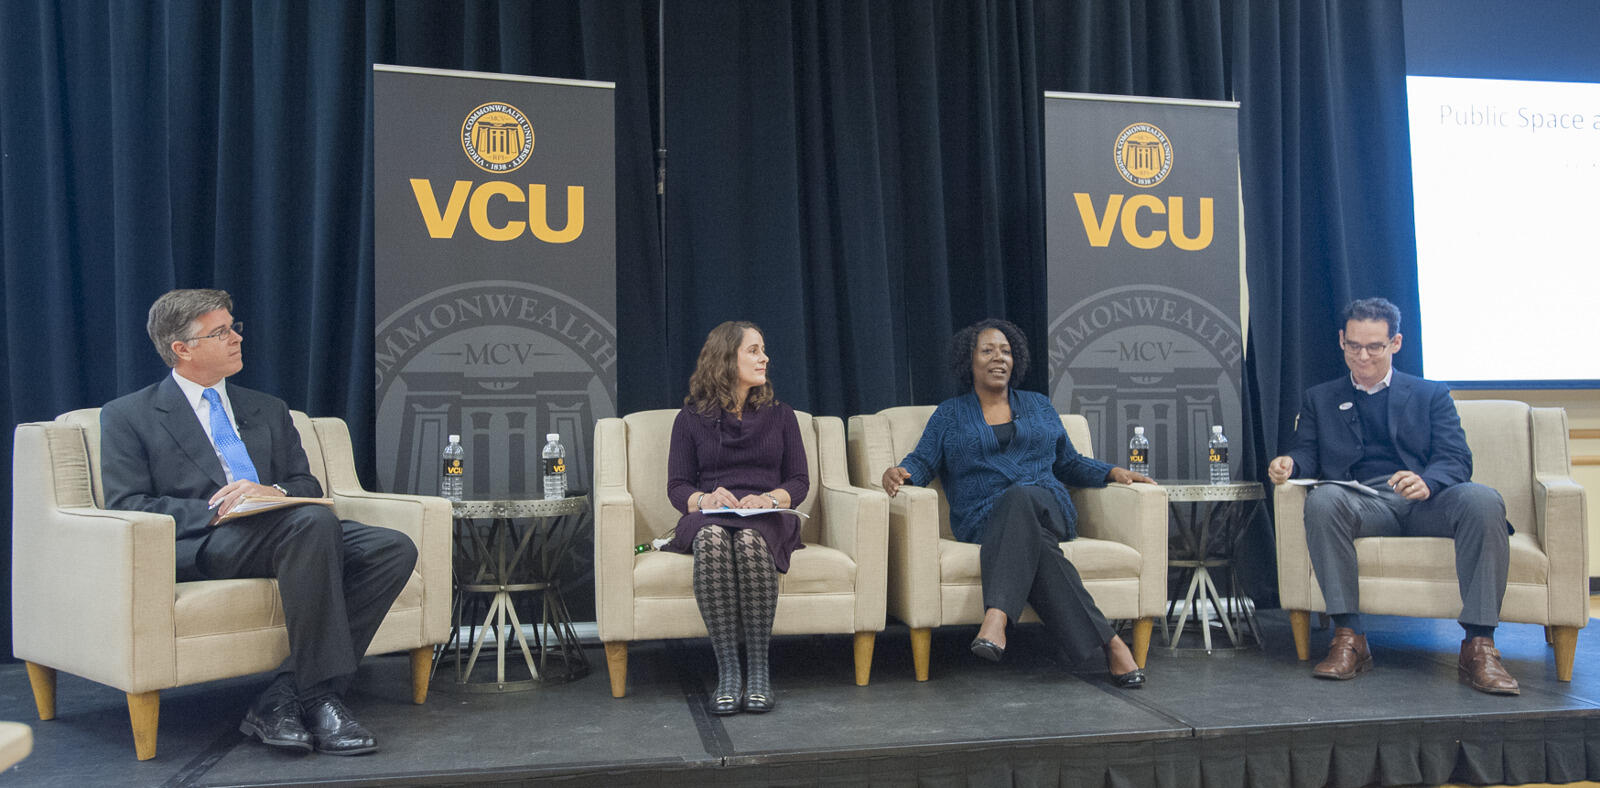 From left: Brian Daugherity, Ph.D., an associate professor in the Department of History; Melanie L. Buffington, Ph.D., associate professor in the Department of Art Education; Christy Coleman, CEO of the American Civil War Museum; and Gabriel Reich, Ph.D., associate professor in the VCU School of Education.